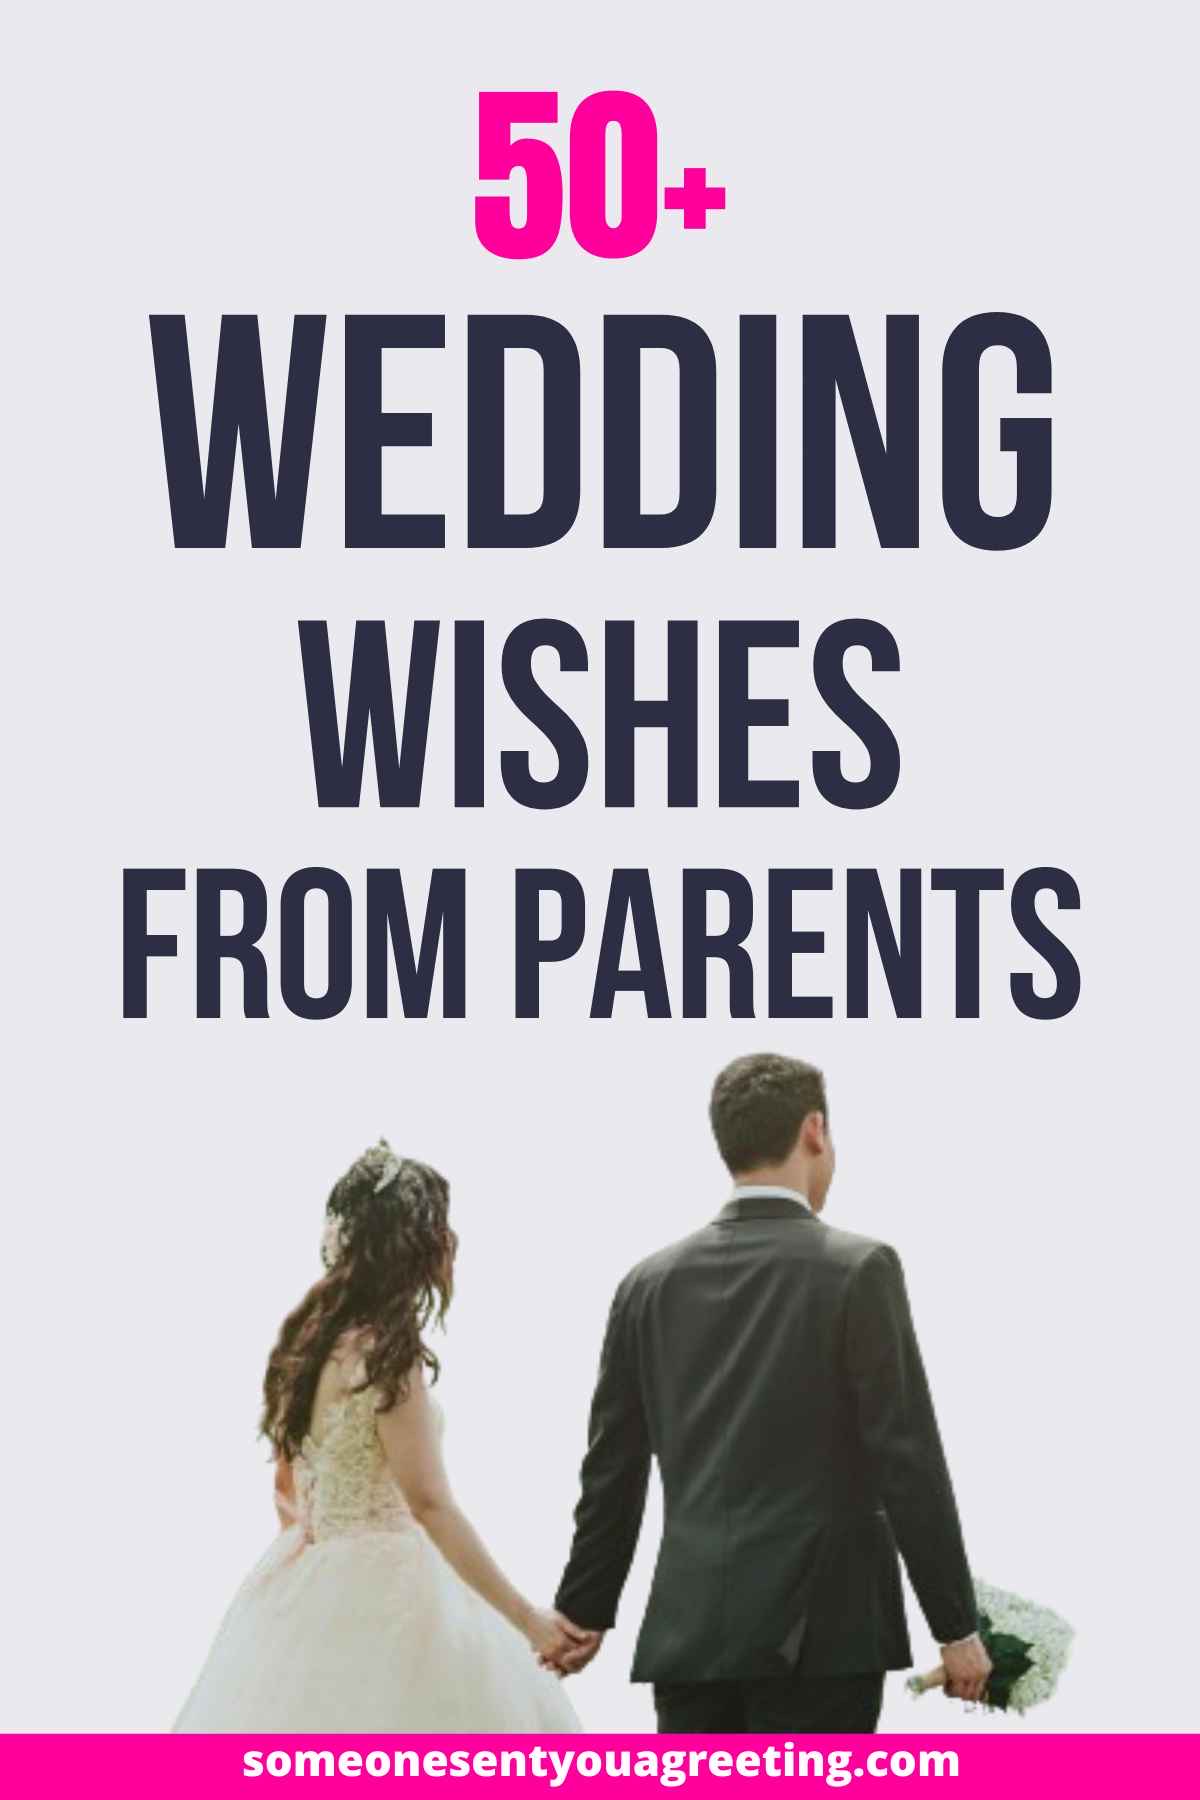 wedding wishes from parents for the happy couple